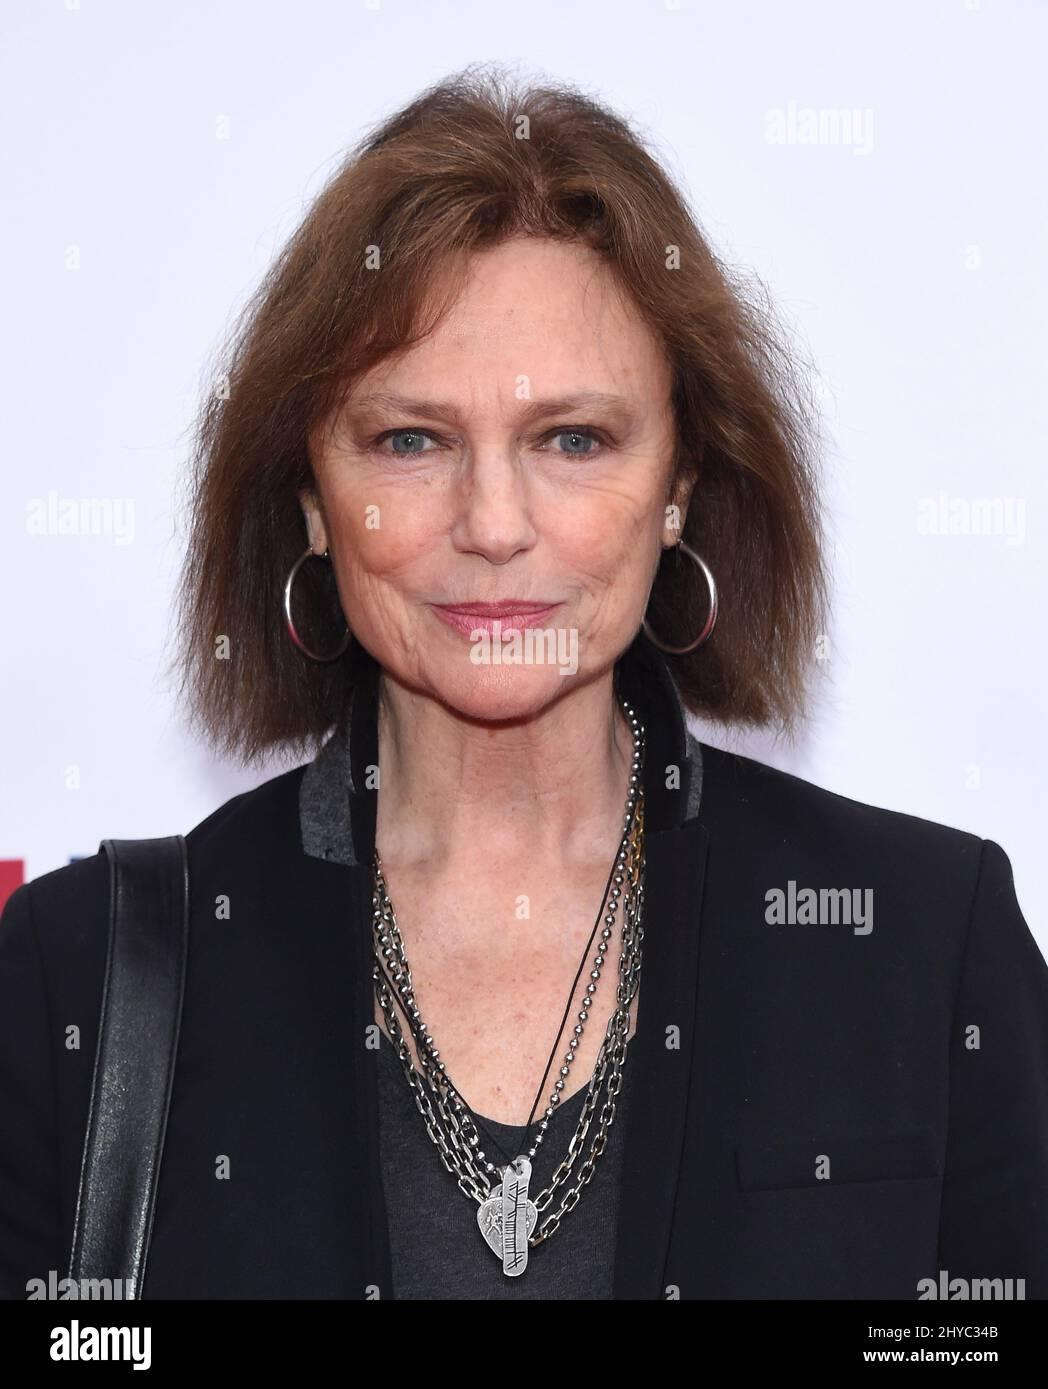 Jacqueline Bisset Attending The Film Is Great Reception Held At